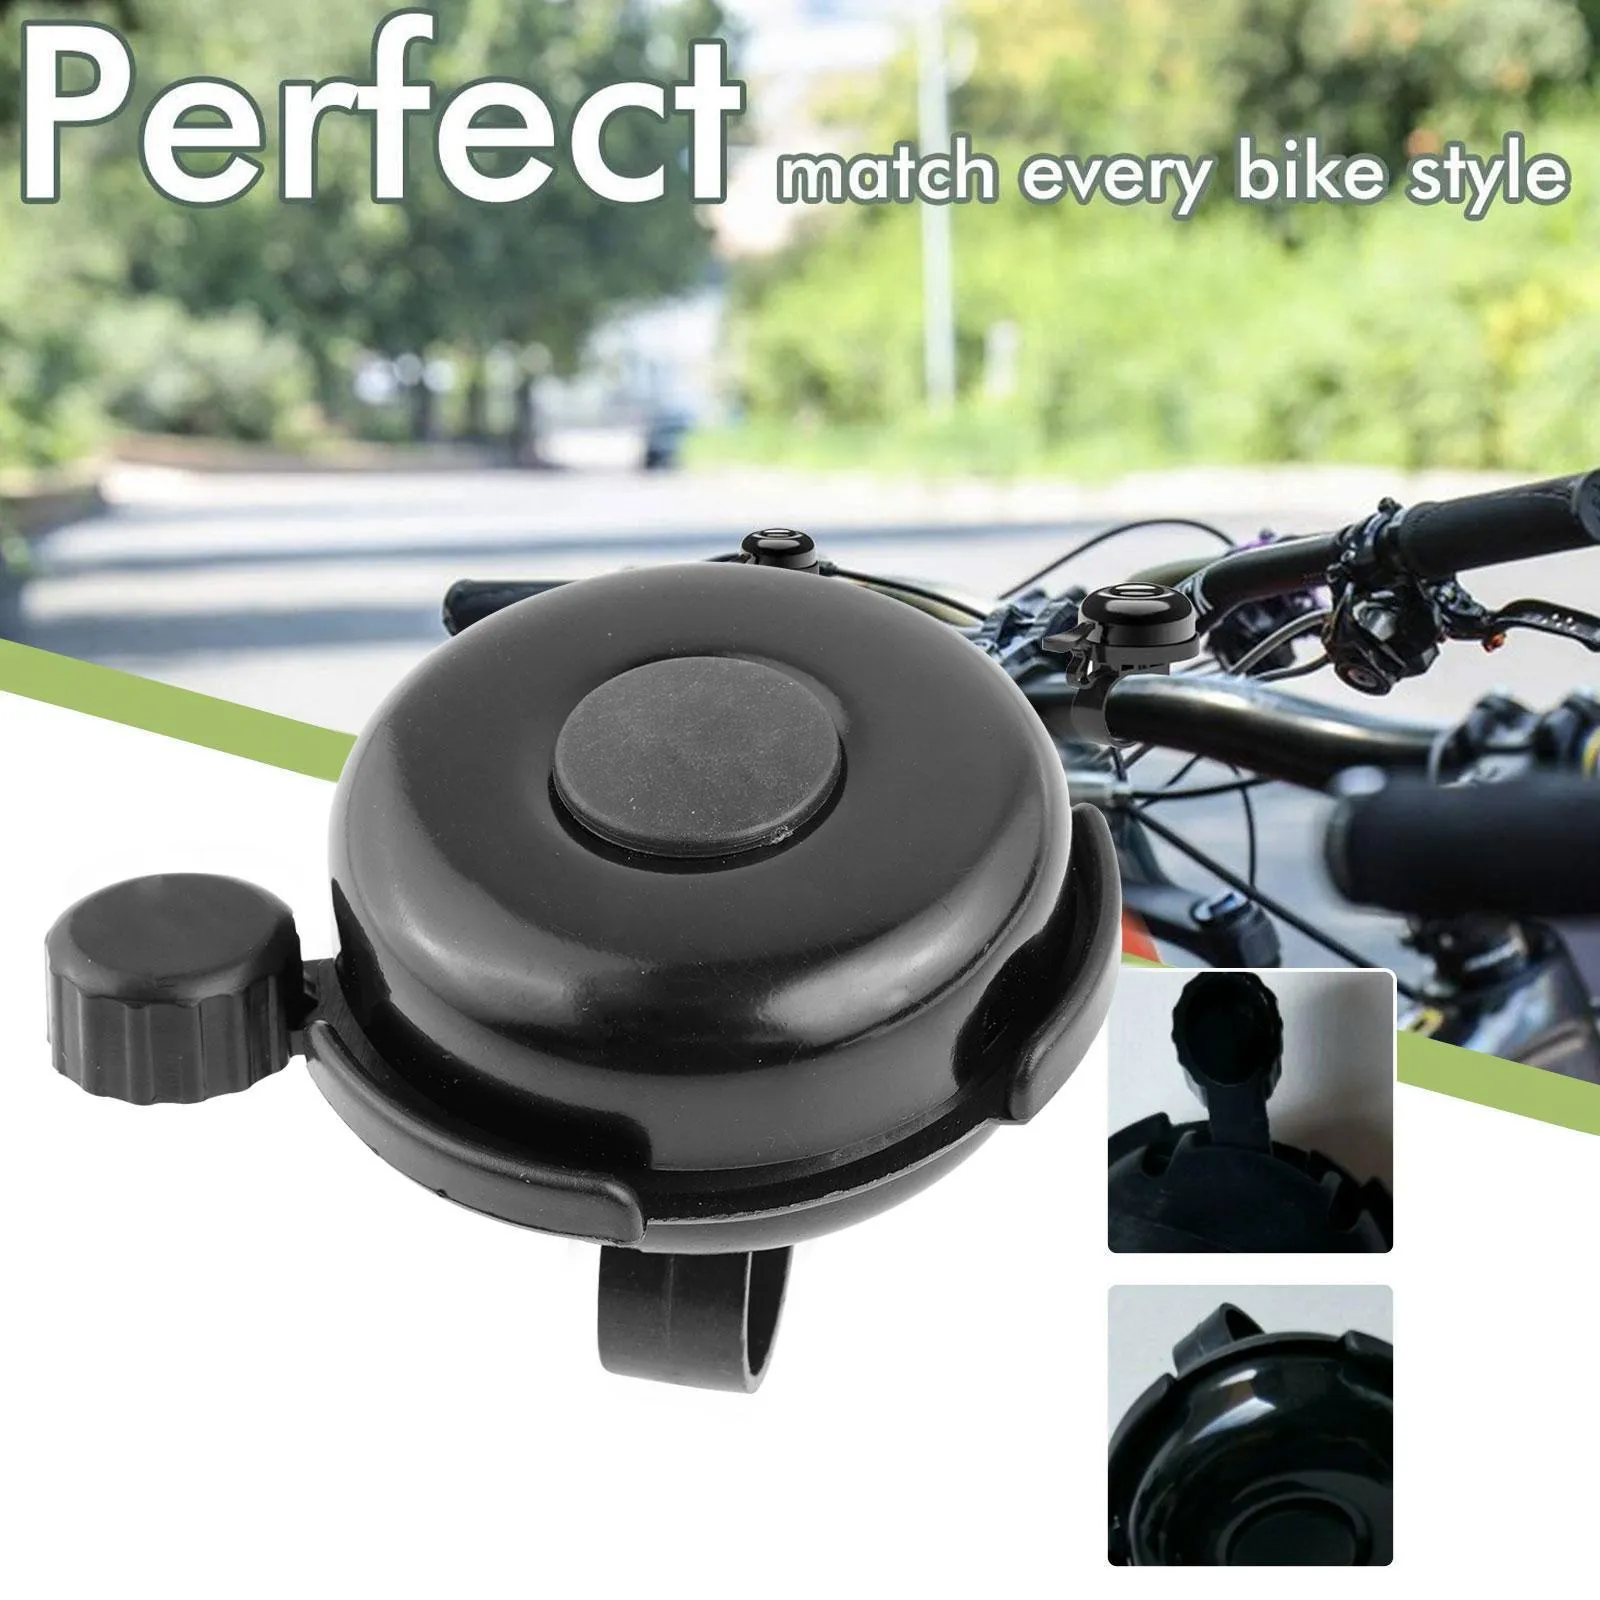 New Bike Bell Alloy Mountain Road Bicycle Horn Sound Alarm For Safety Cycling Handlebar Metal Bicycle Call Bike Accessories